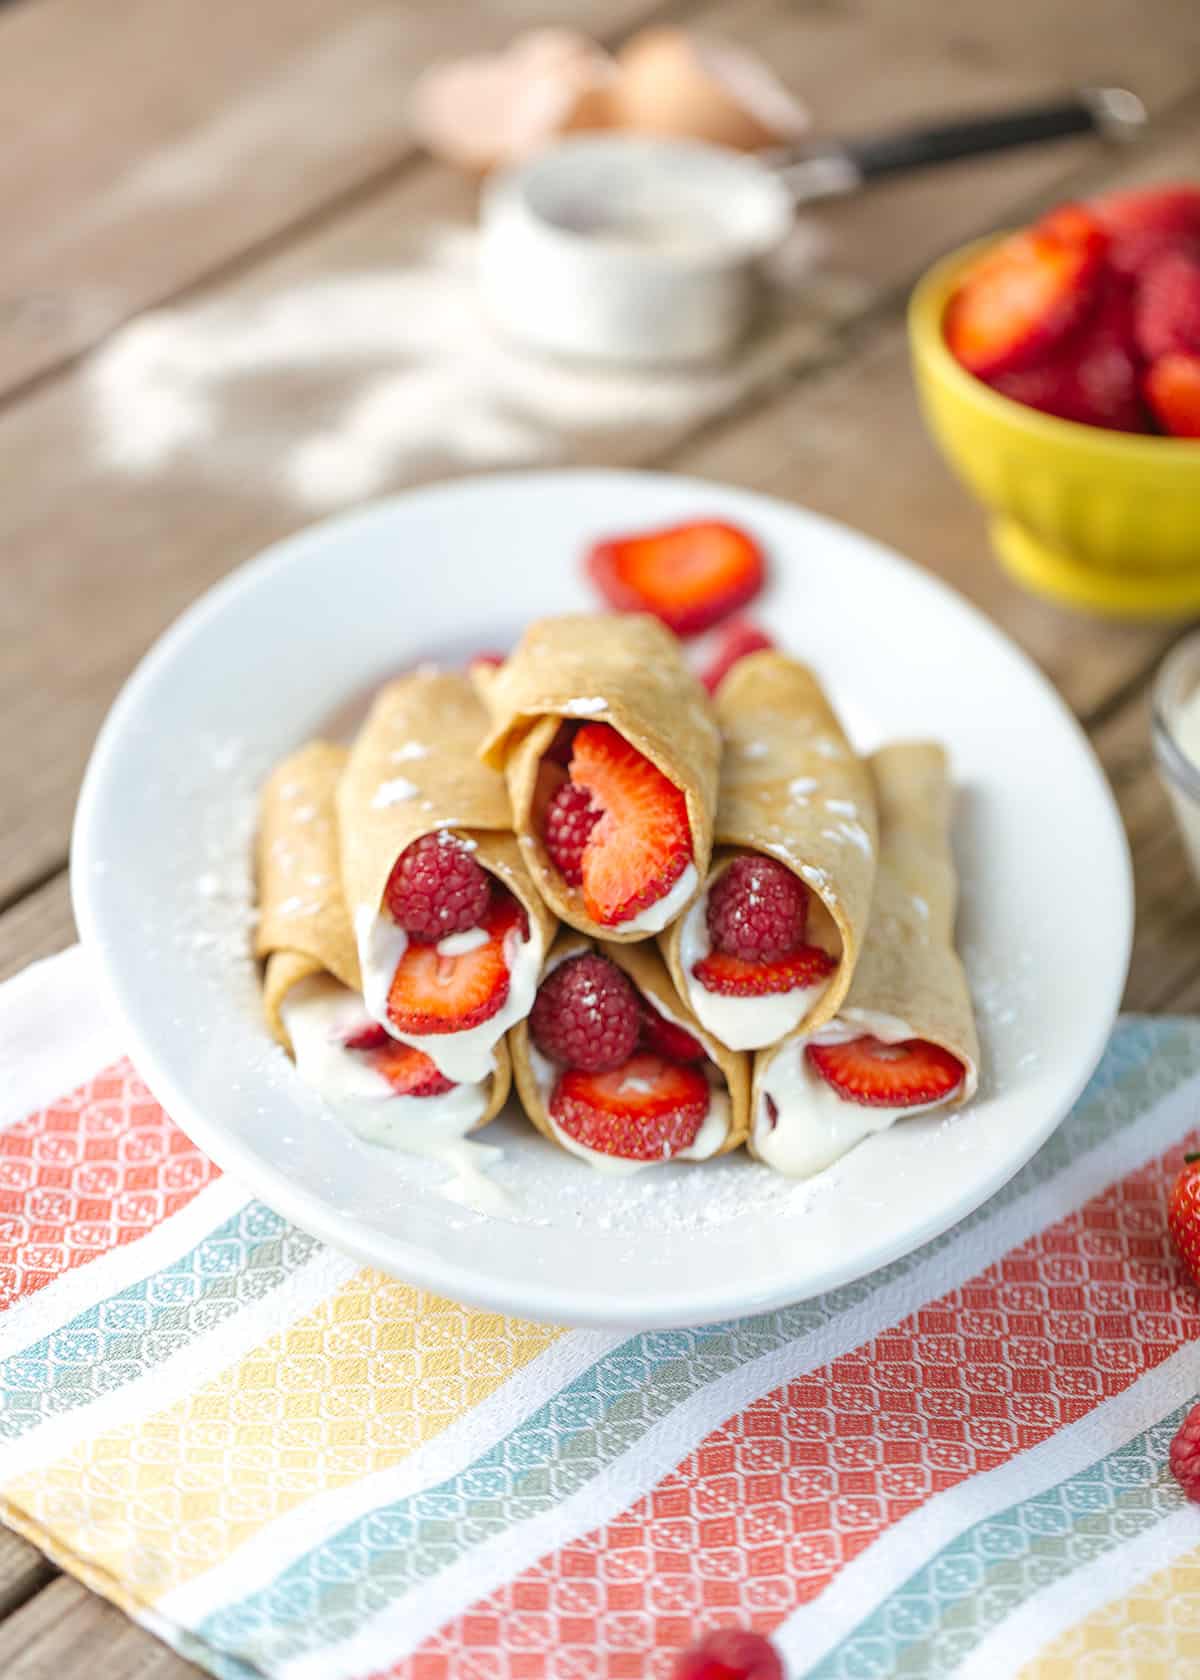 a plate with strawberry crepes filled with fresh strawberries and a cream sauce on a colorful napkin